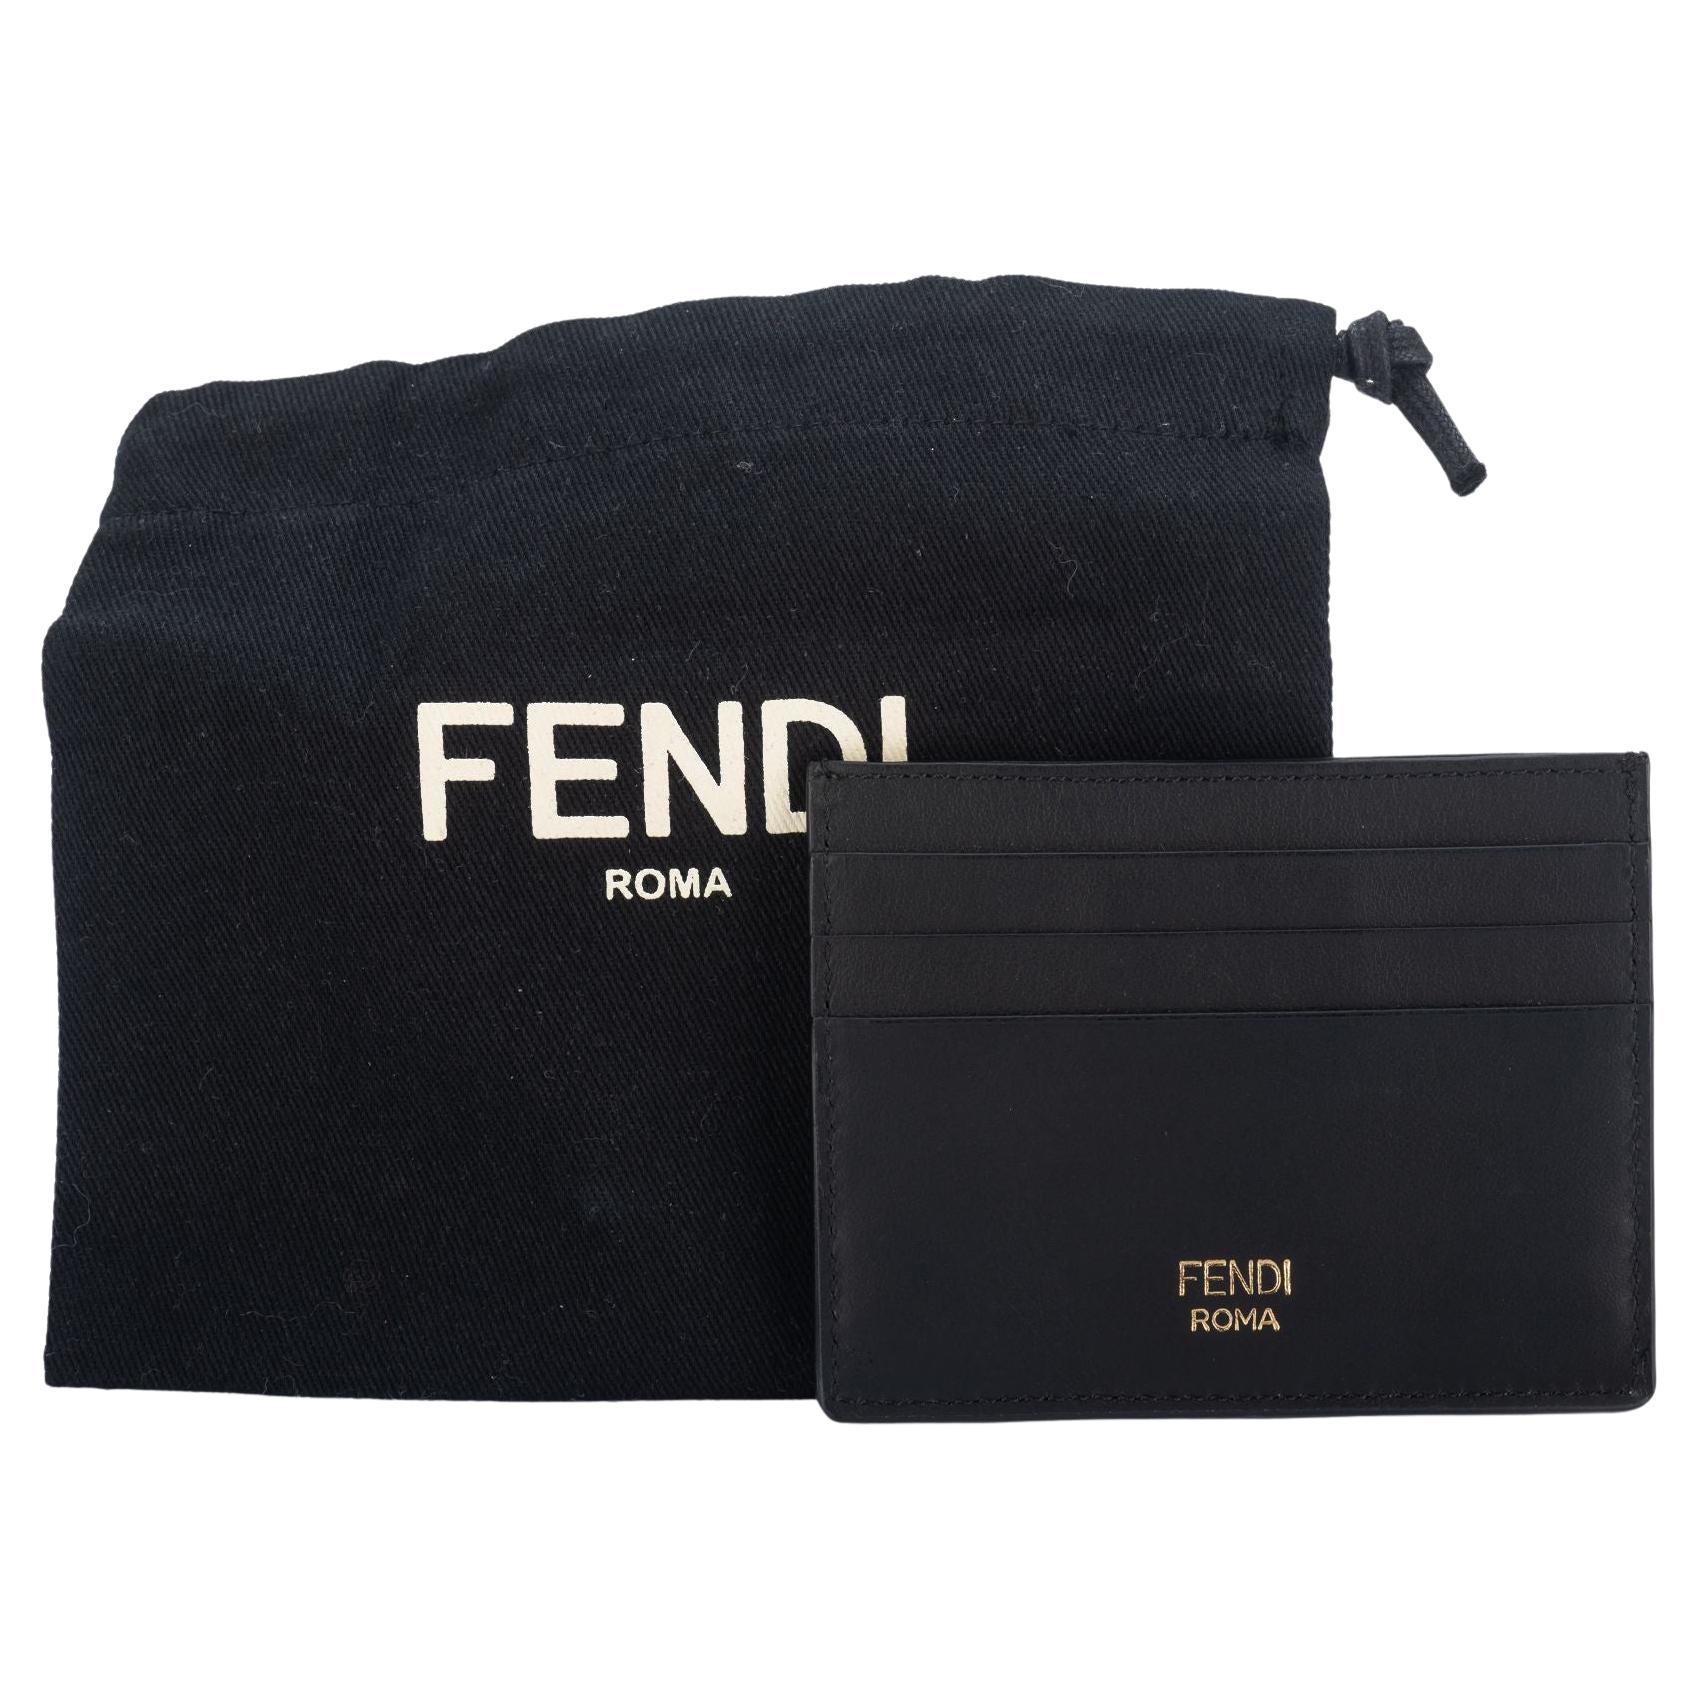 Fendi brad new limited edition matt black credit card monster case with gold eyes. Comes with original dust cover.